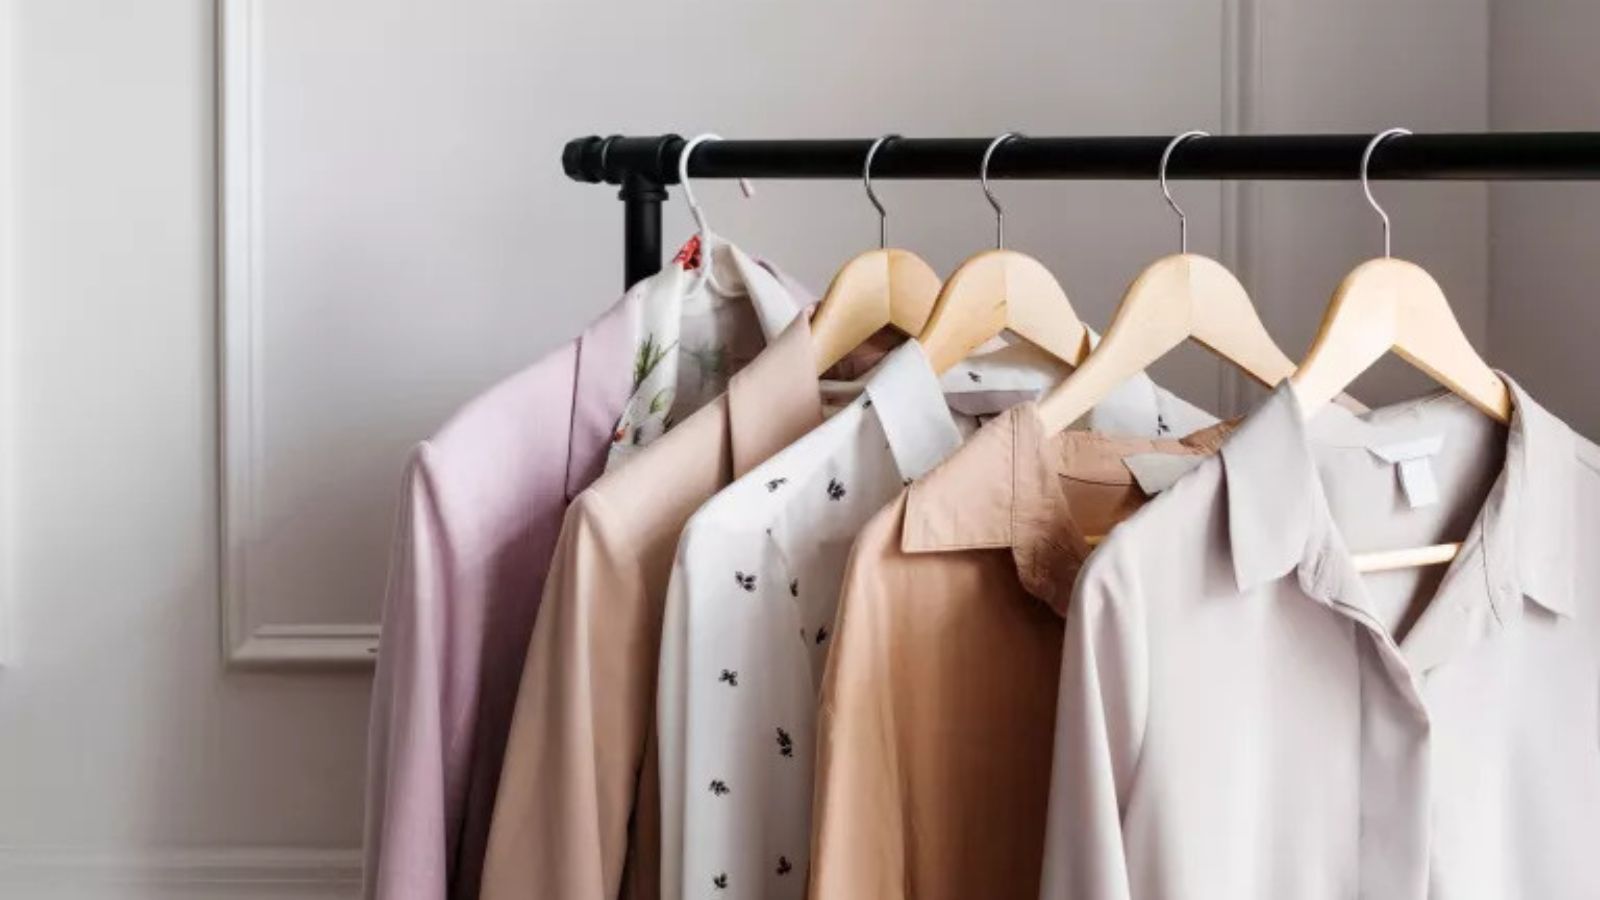 How to dry clean different garments at home